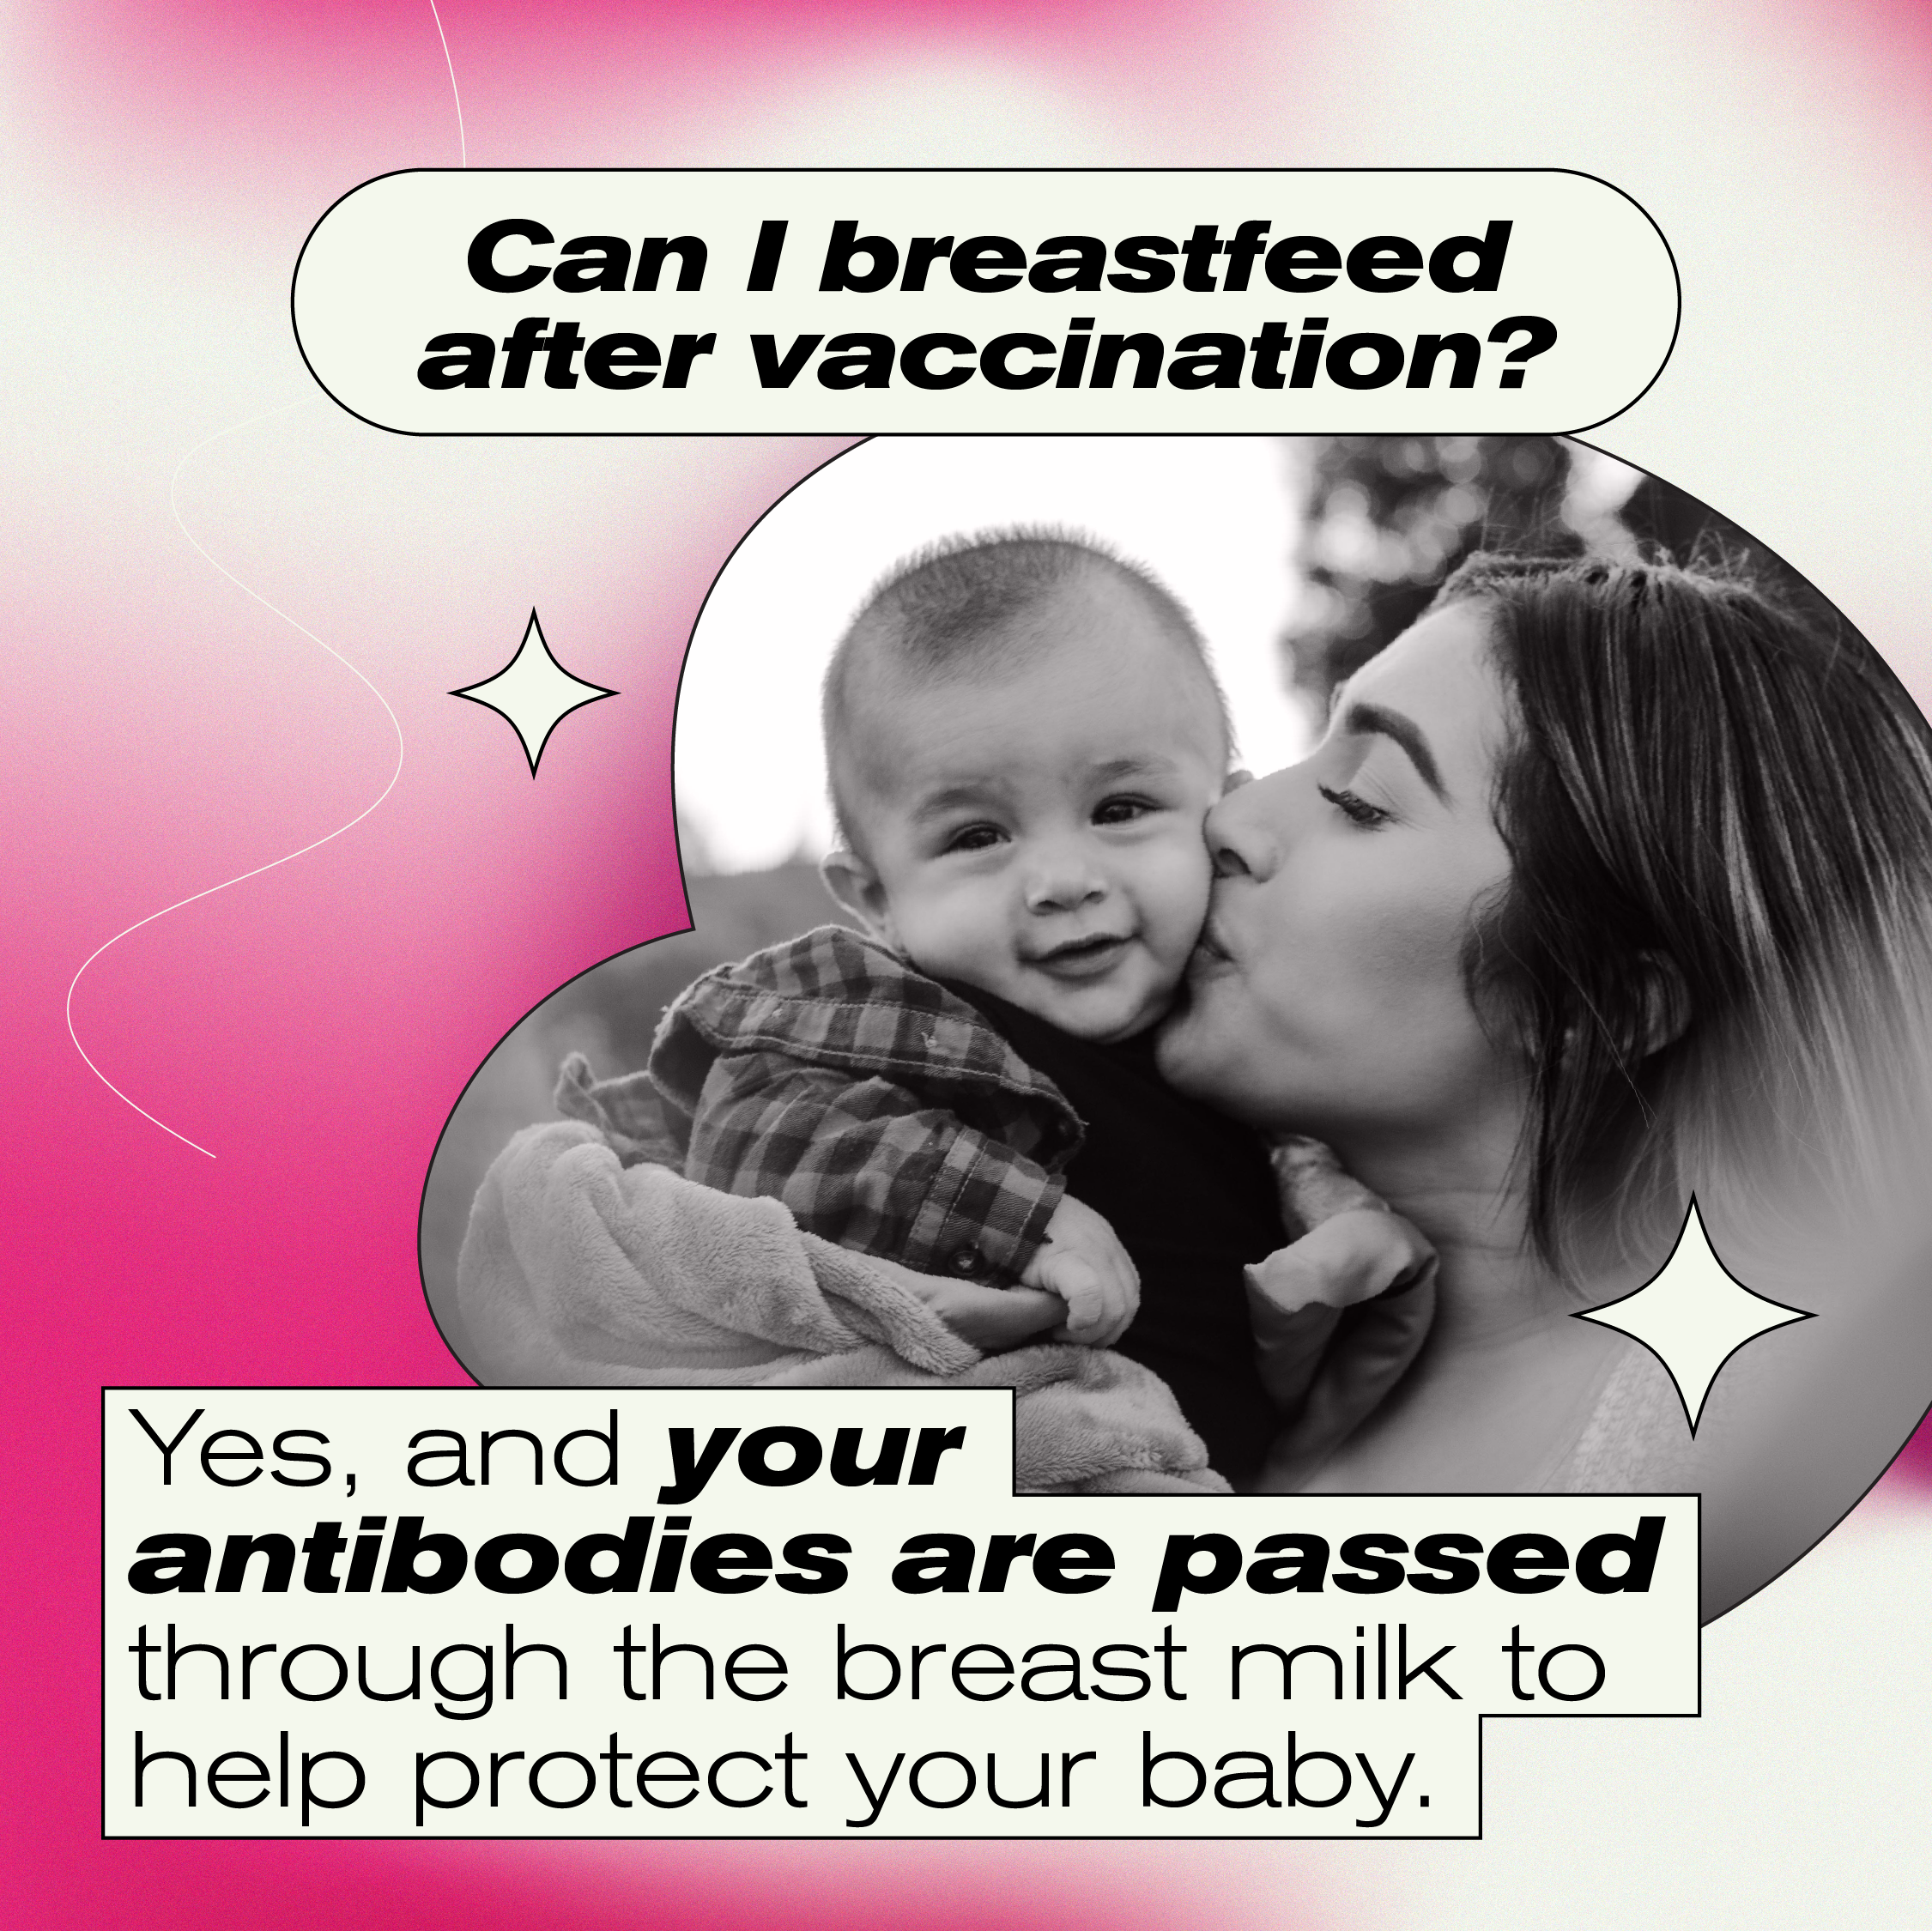 Pink graphic with a woman and baby with the text "Can I breastfeed after vaccination? Yes, and your antibodies are passed through the breast milk to help protect your baby."